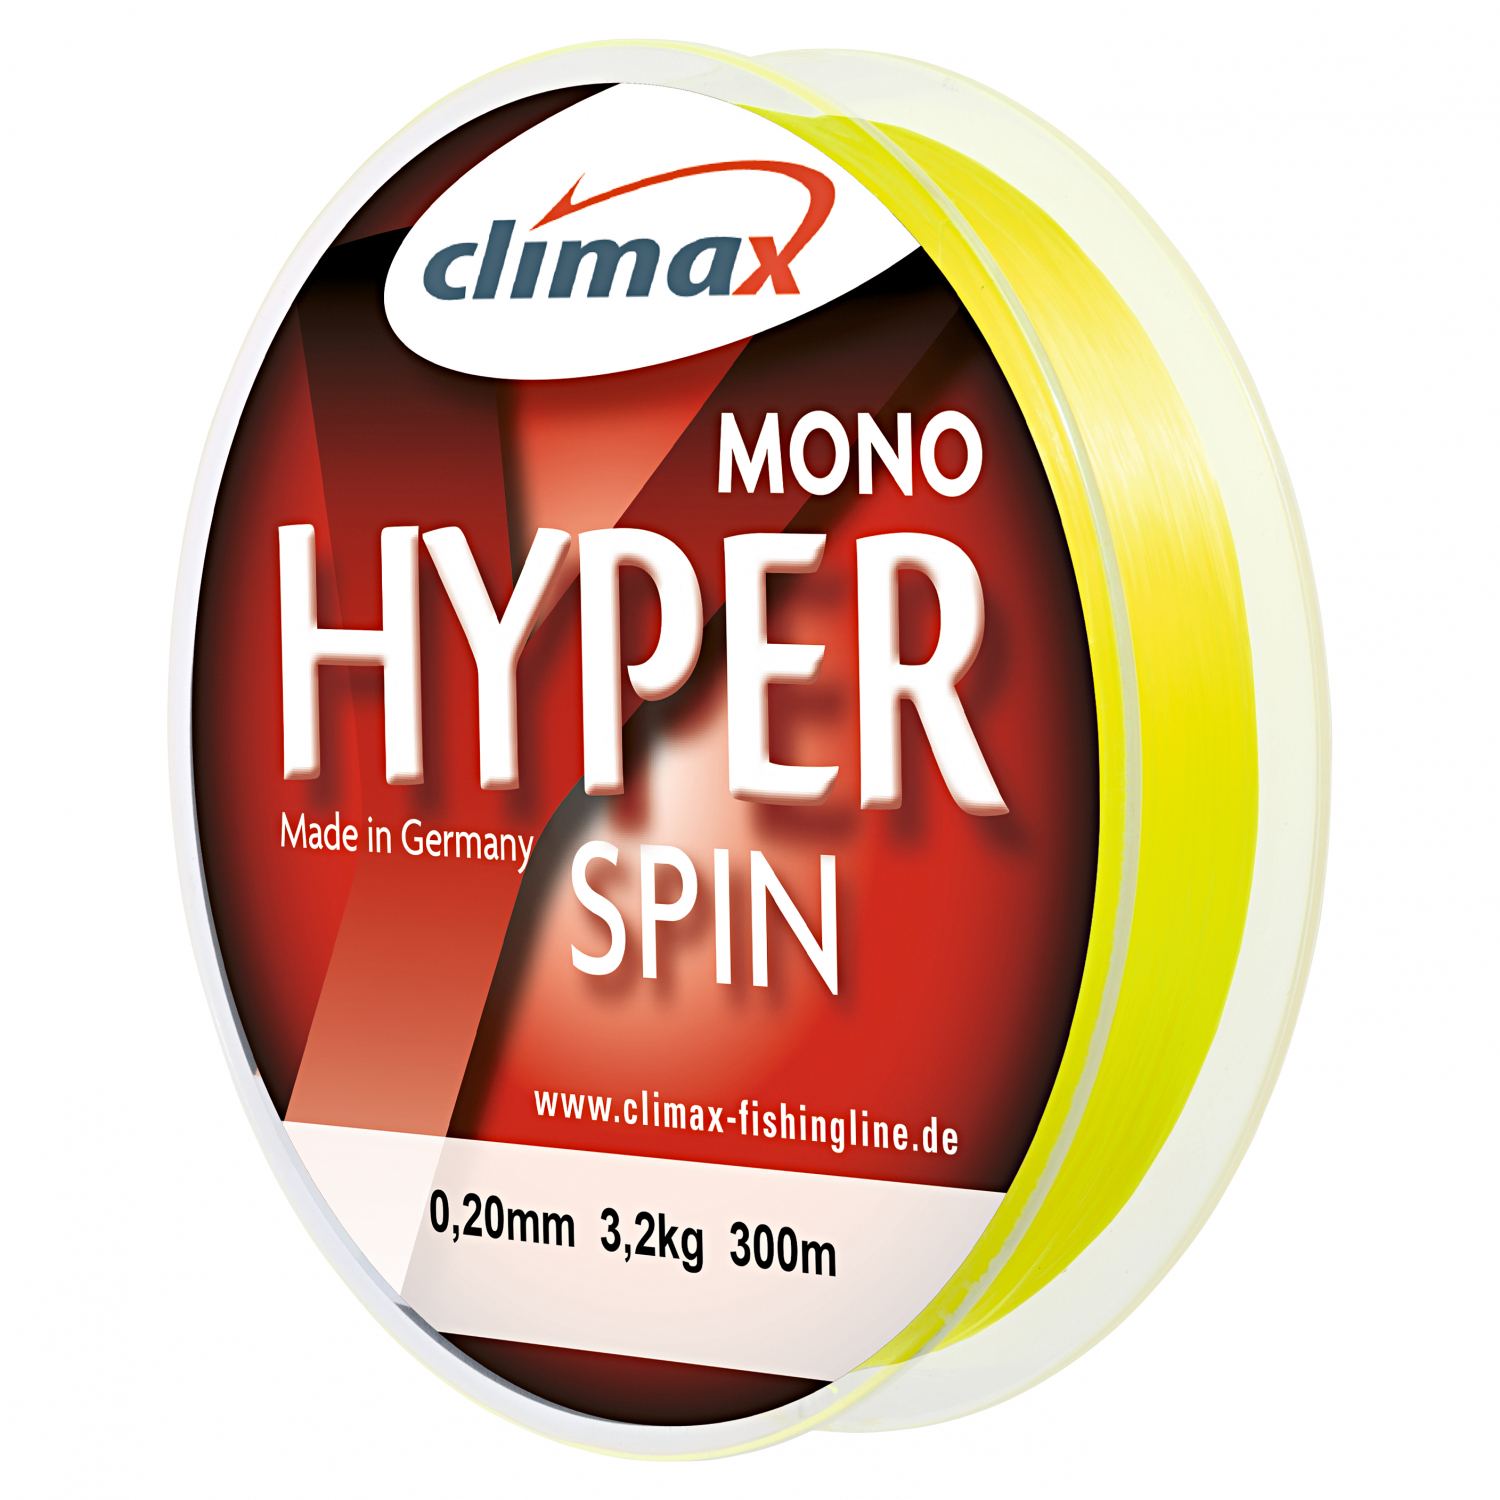 Climax Climax Hyper Spin fluor yellow Fishing Line 